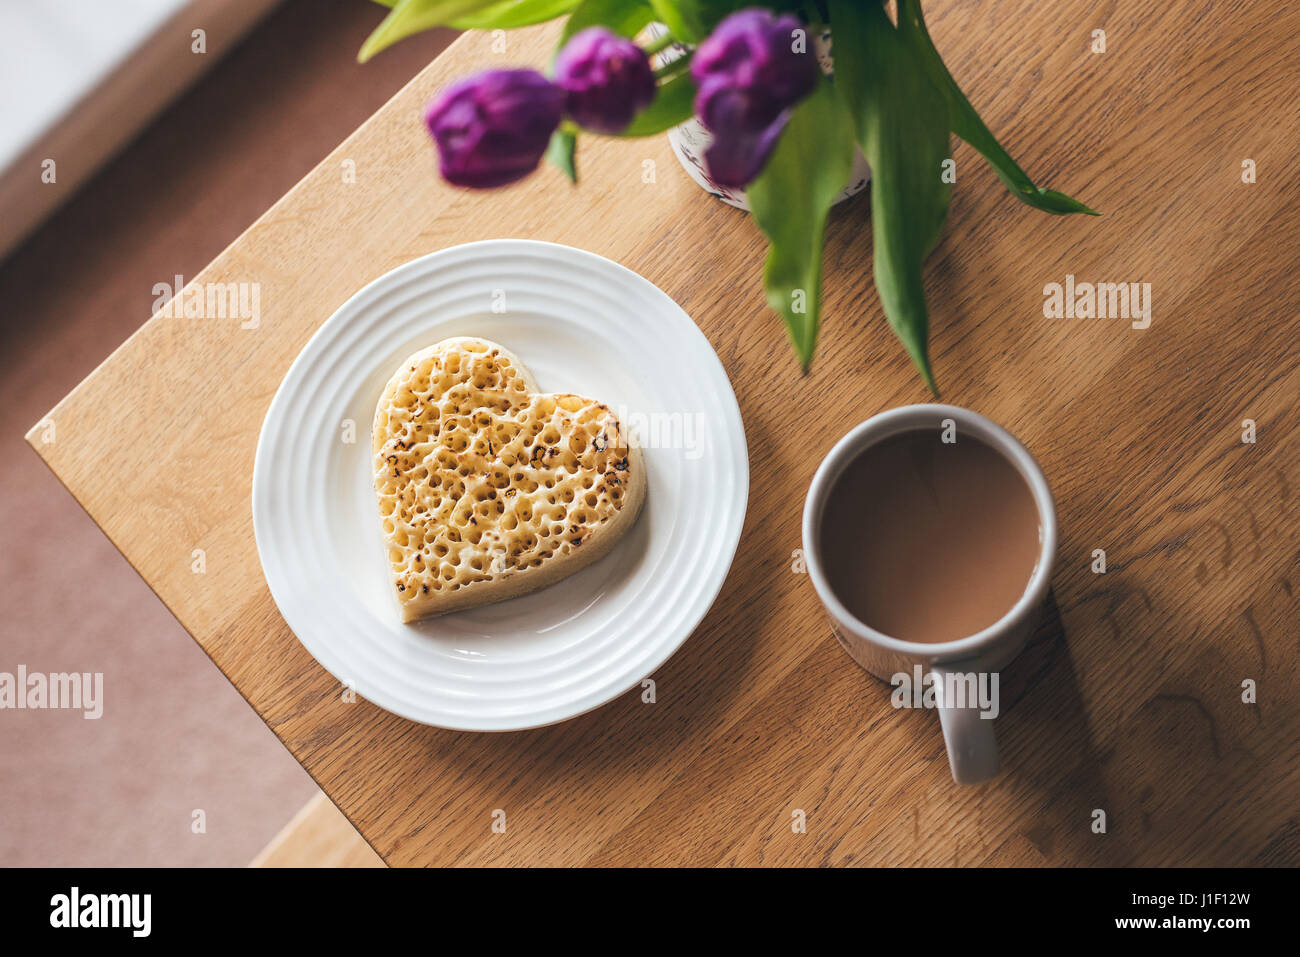 Heart-shaped toasted crumpet on white plate with mug of tea on table with purple tulips. Stock Photo